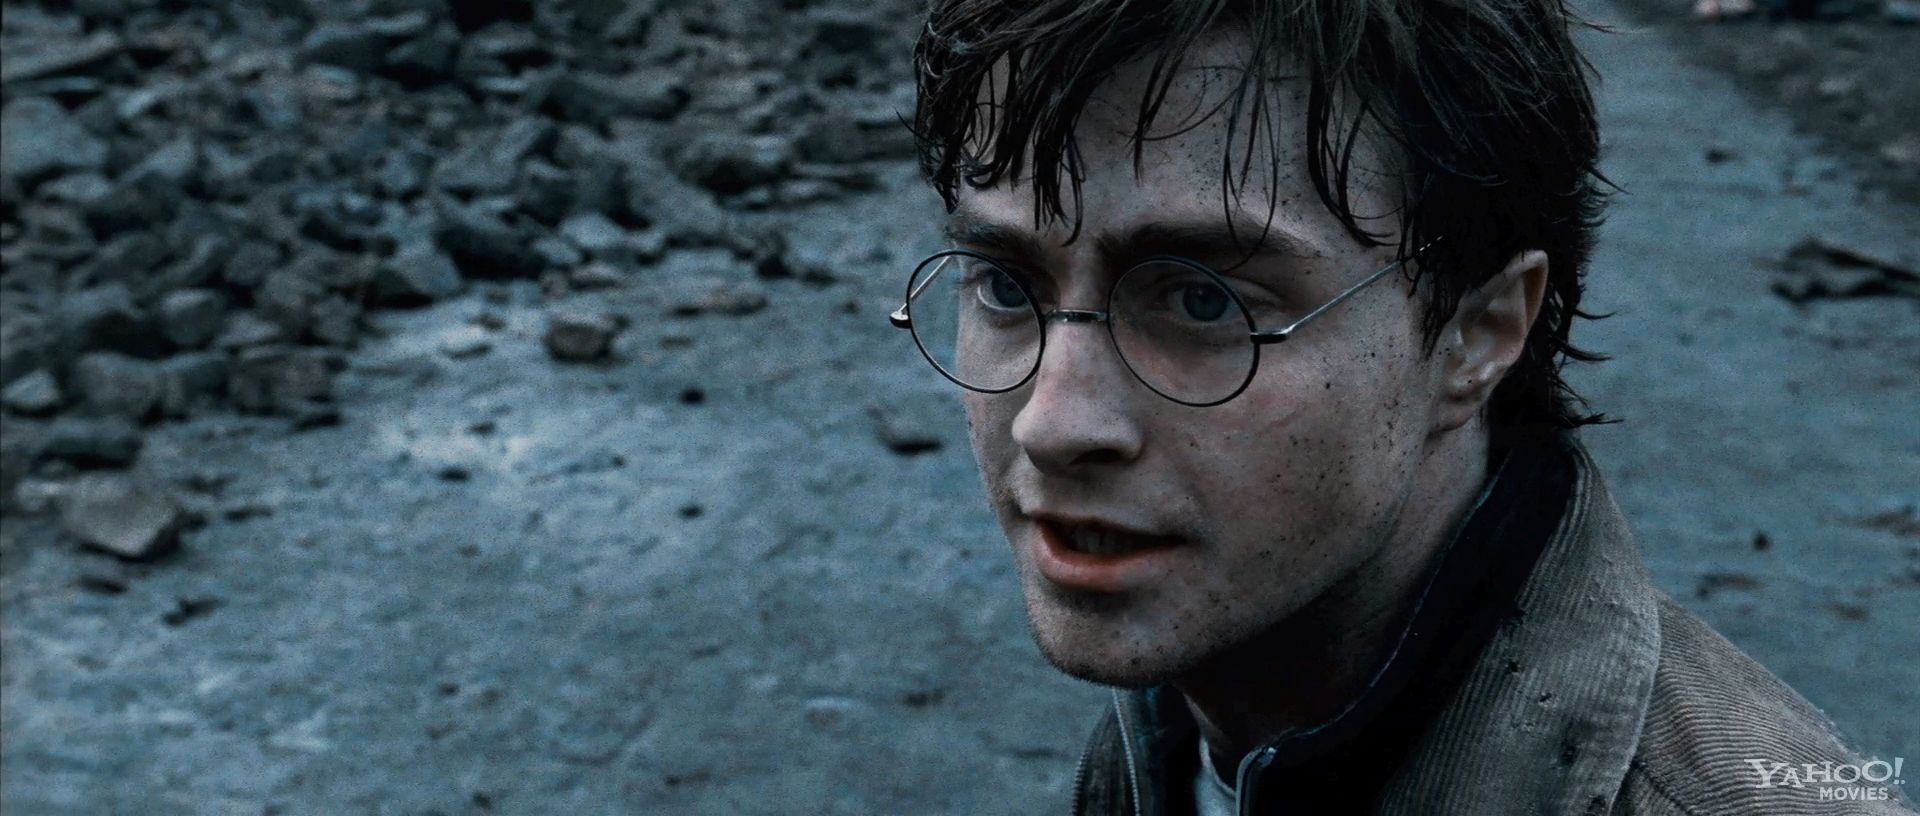 Harry Potter and the Deathly Hallow Trailer Still #2